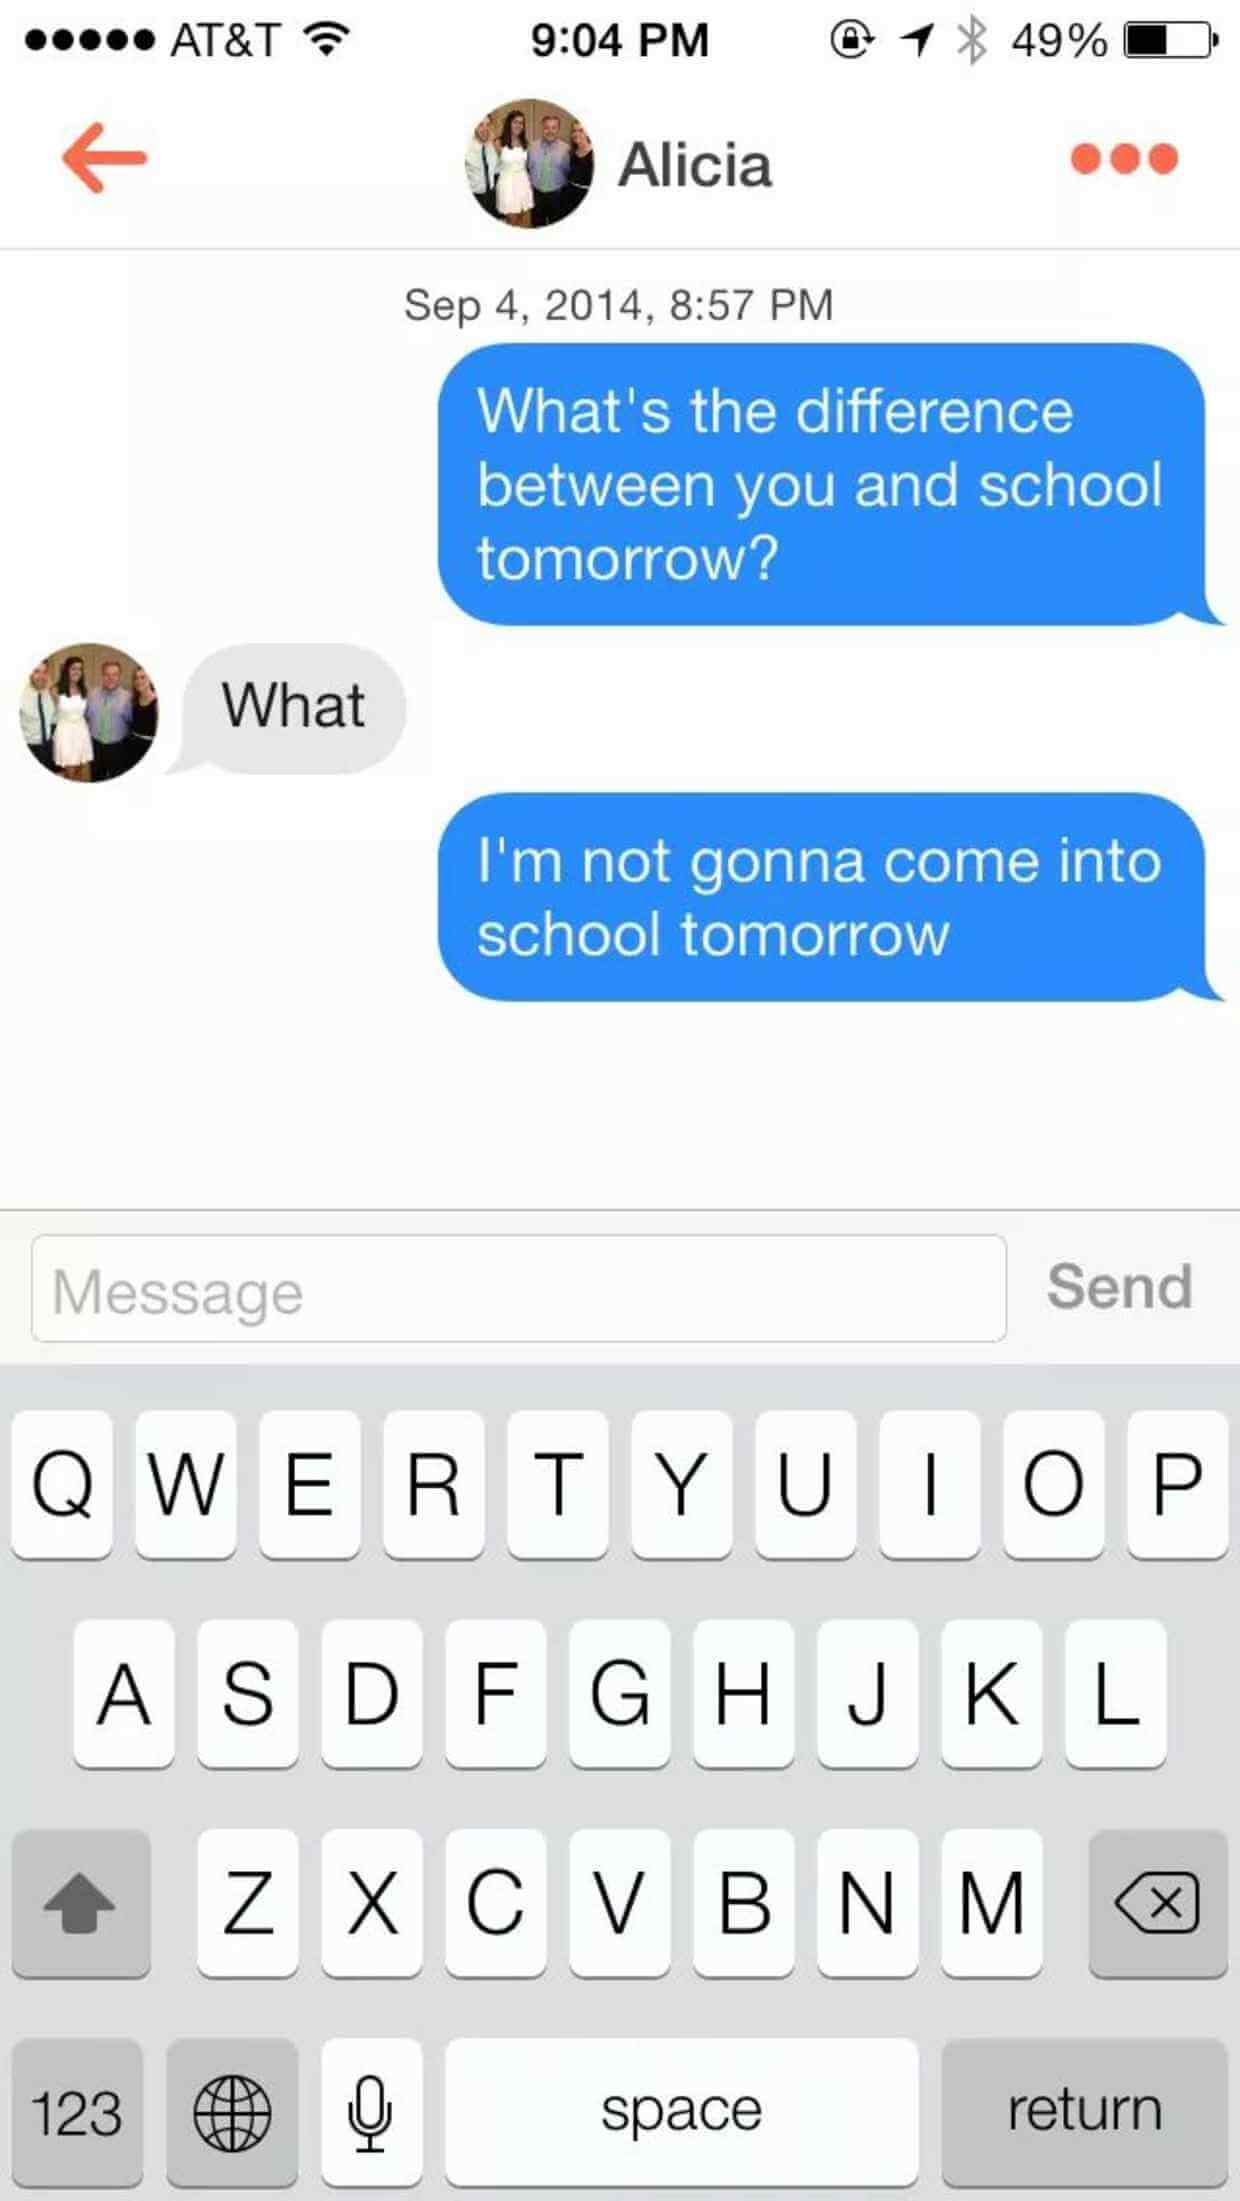 best pick up lines on dating apps